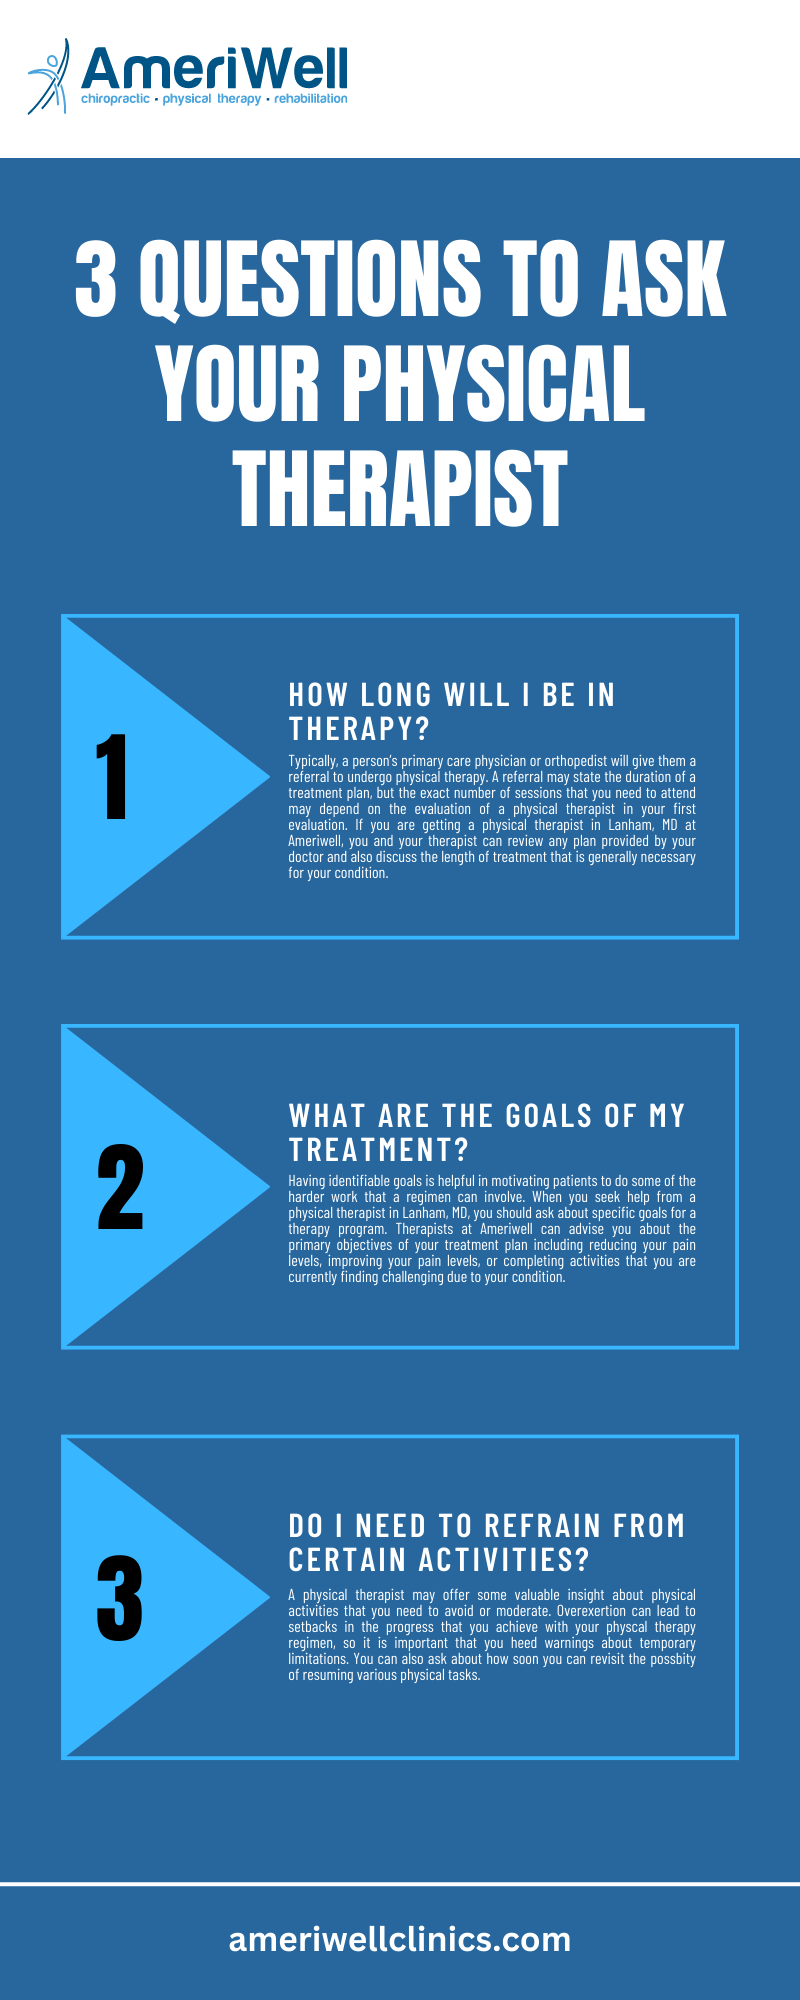 3 QUESTIONS TO ASK YOUR PHYSICAL THERAPIST INFOGRAPHIC